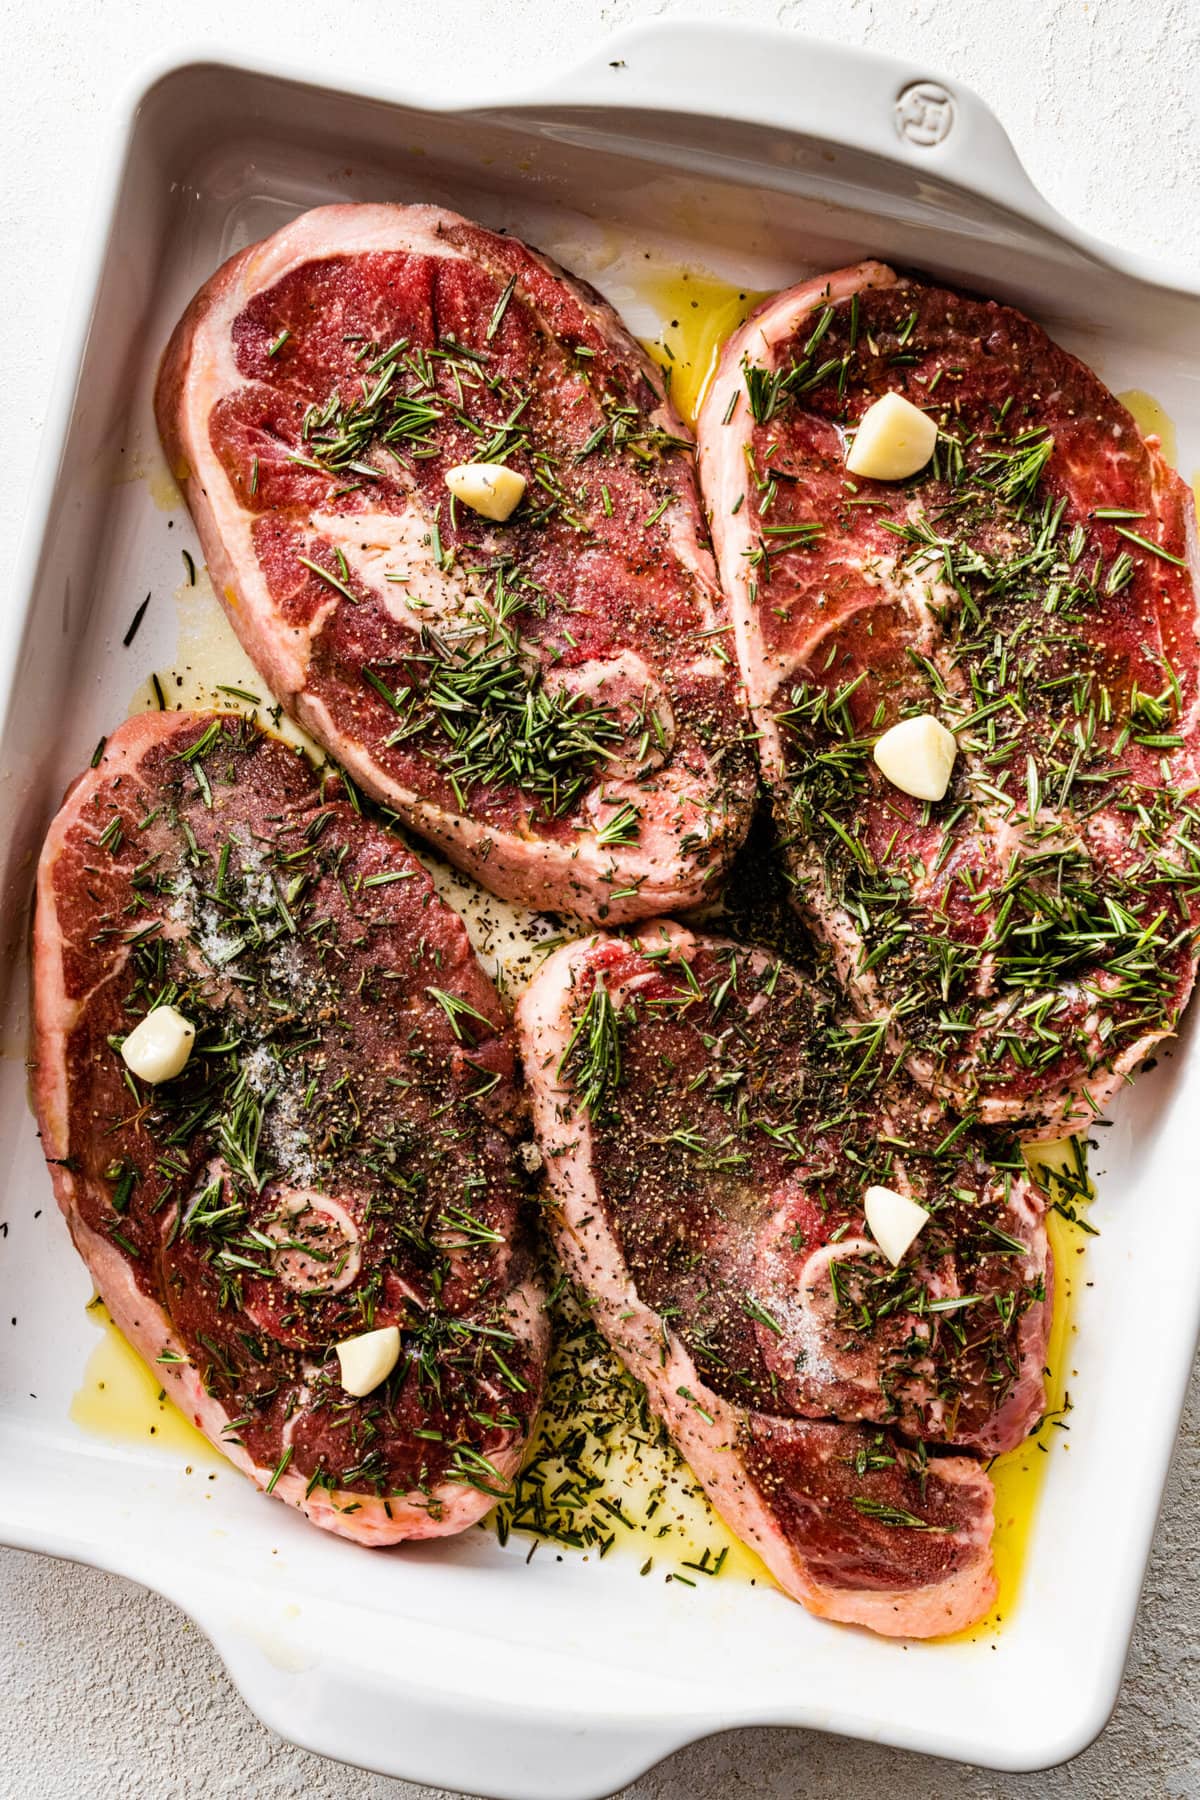 How to make lamb should chops step-by-step: marinating the lamb chops in herbs, garlic, and olive oil.